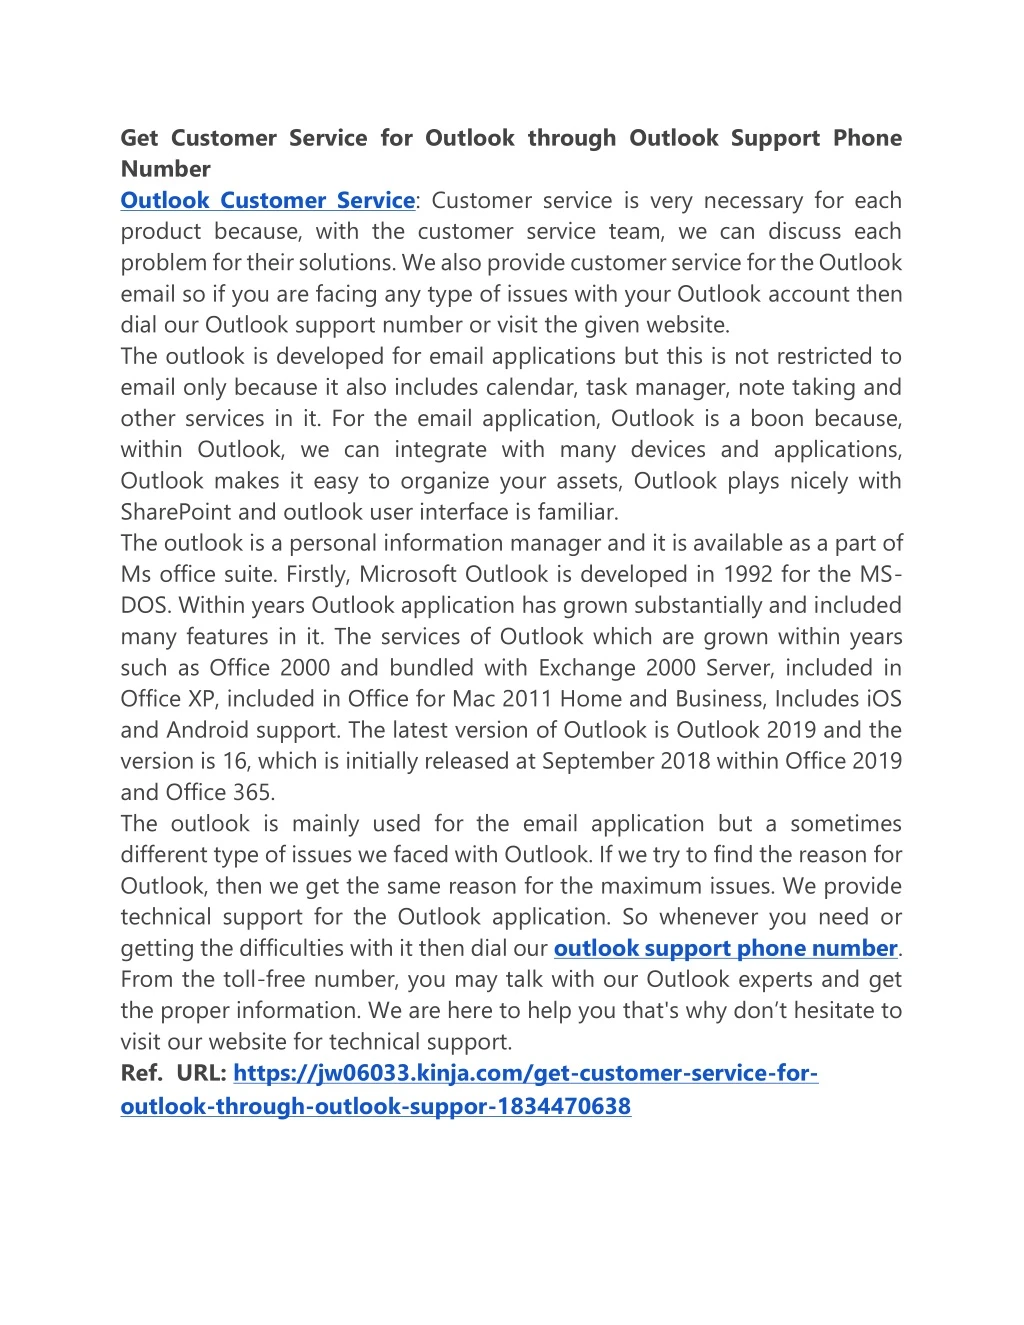 get customer service for outlook through outlook